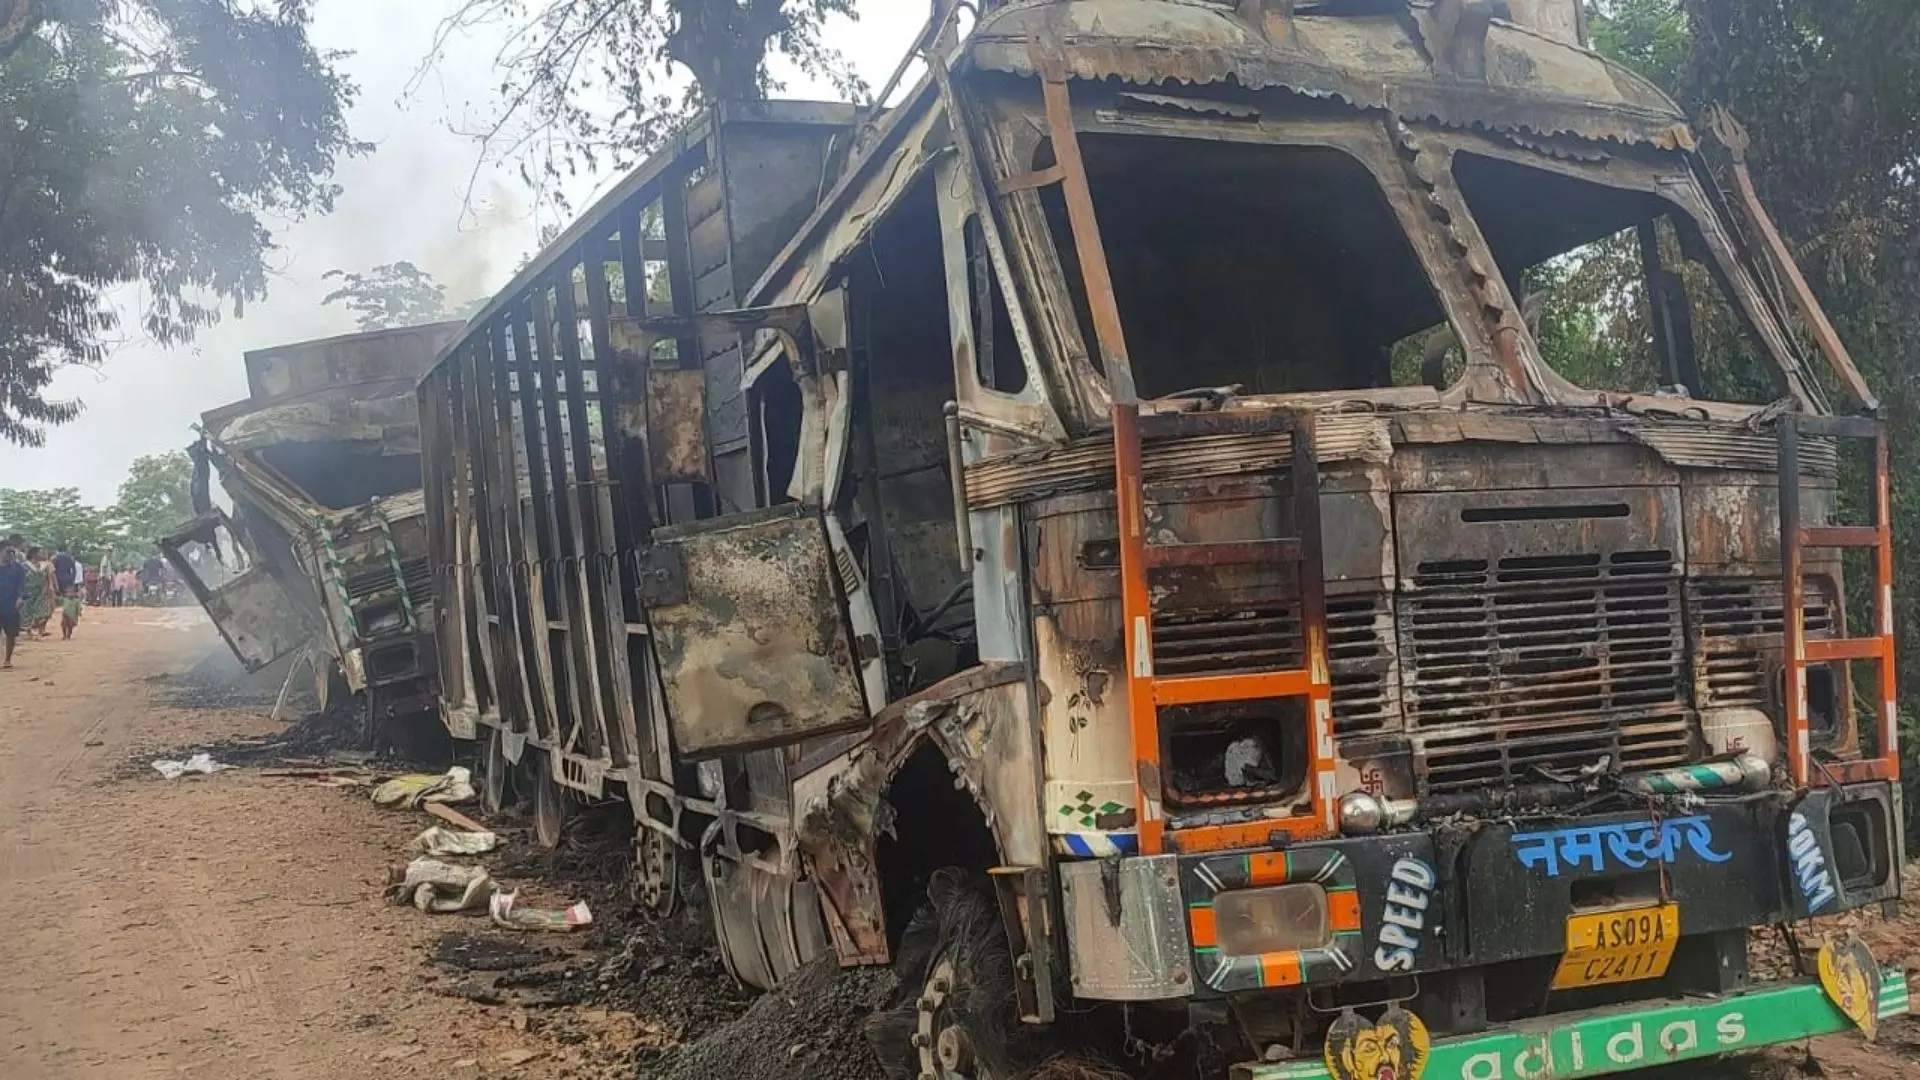 Strangers Set Fire to 7 Vehicles in Assam